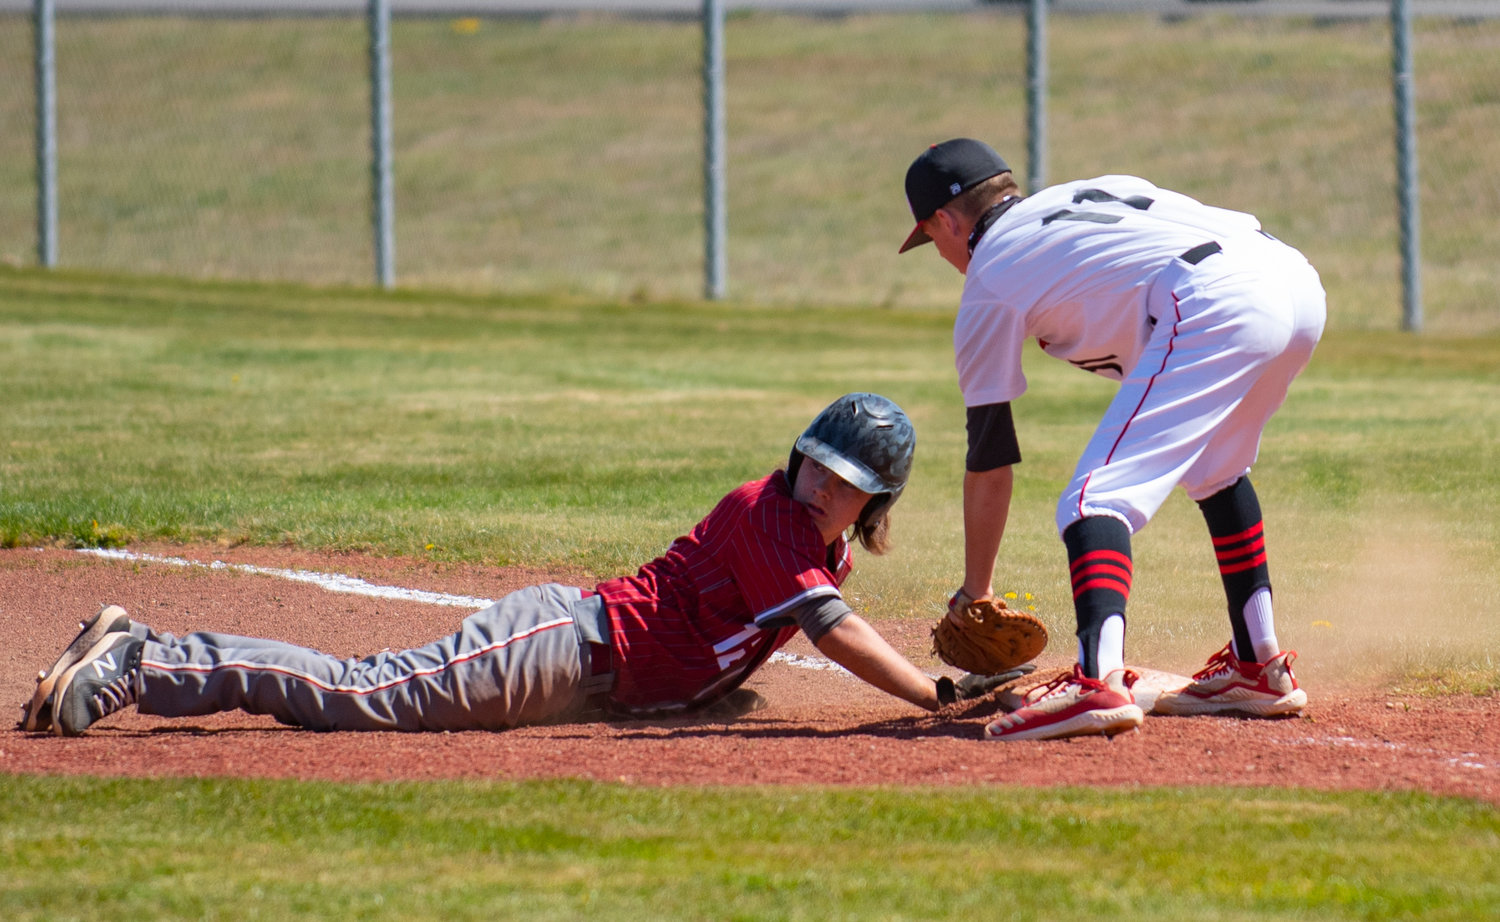 A Hoquiam runner slides safely back into first on a pickoff attempt by Tenino pitcher Easton Snider as Drew Hart (11) puts the tag on.